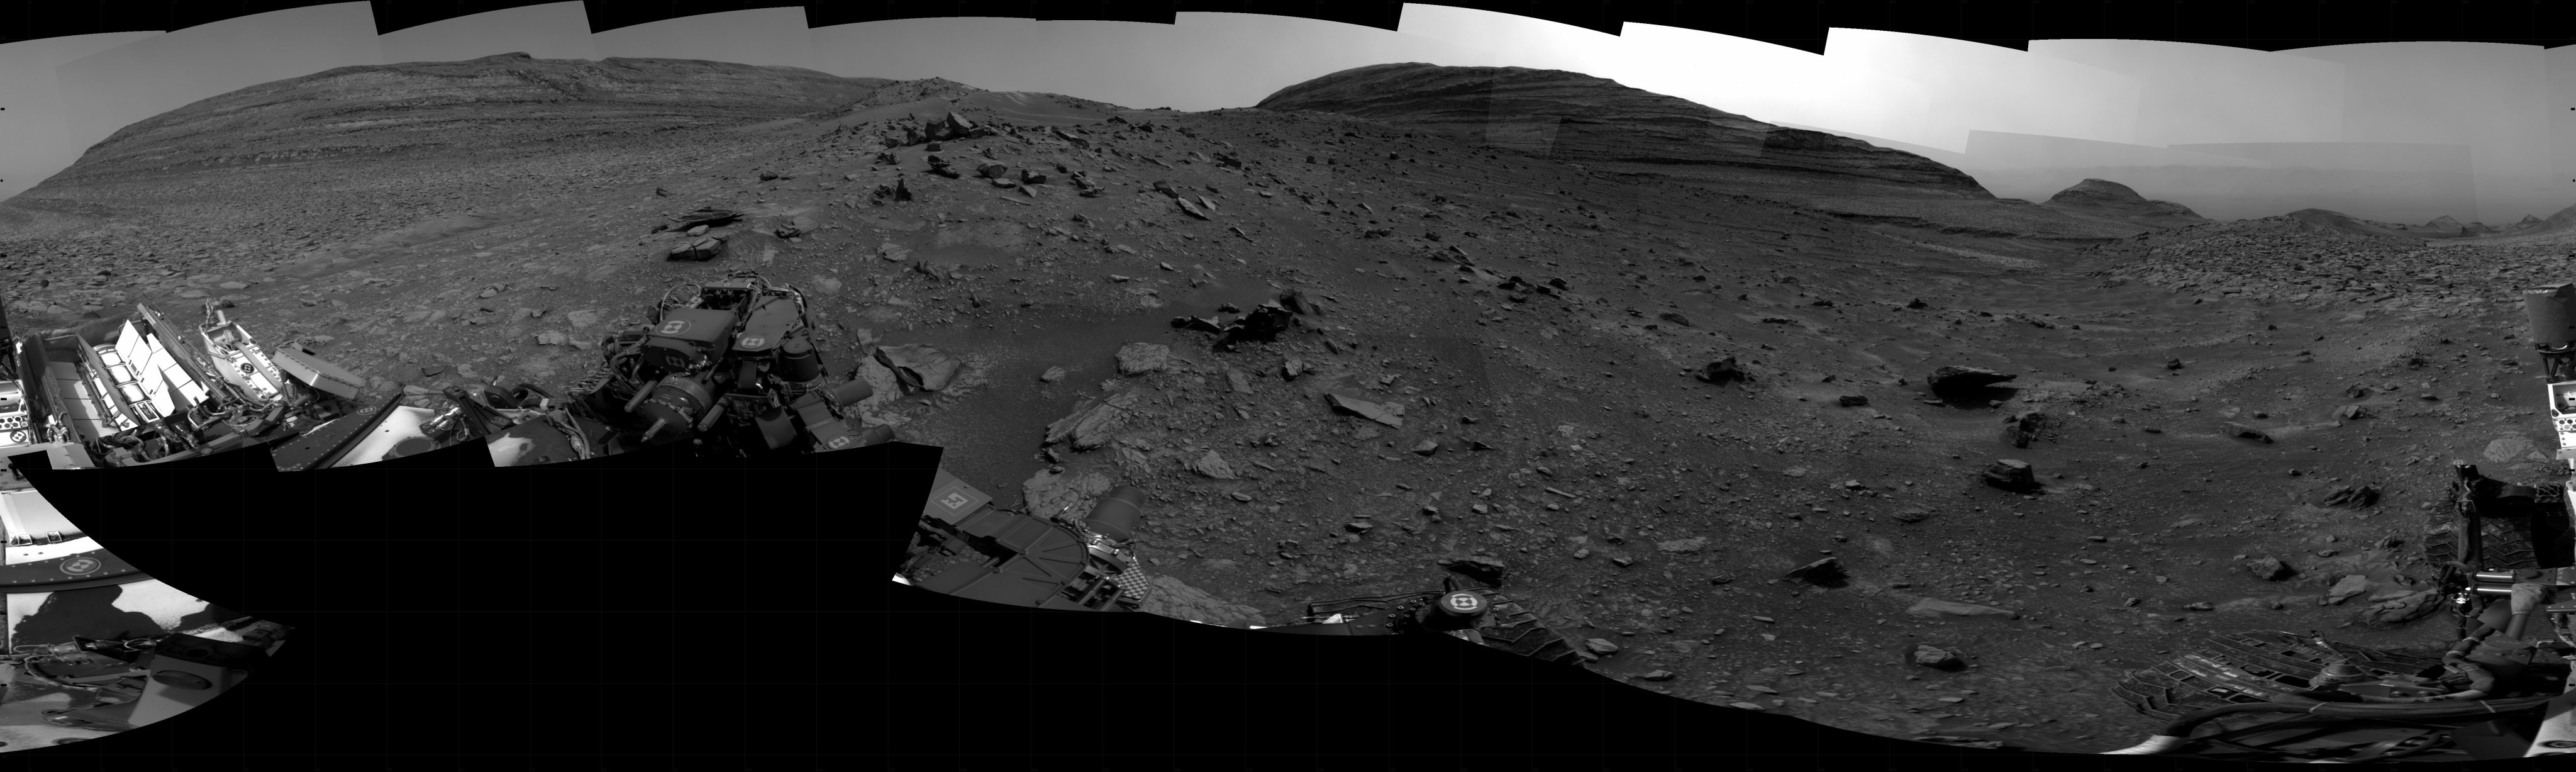 Curiosity took the images on May 23, 2024, Sol 4193 of the Mars Science Laboratory mission at drive 2054, site number 107. The local mean solar time for the image exposures was 2 PM.